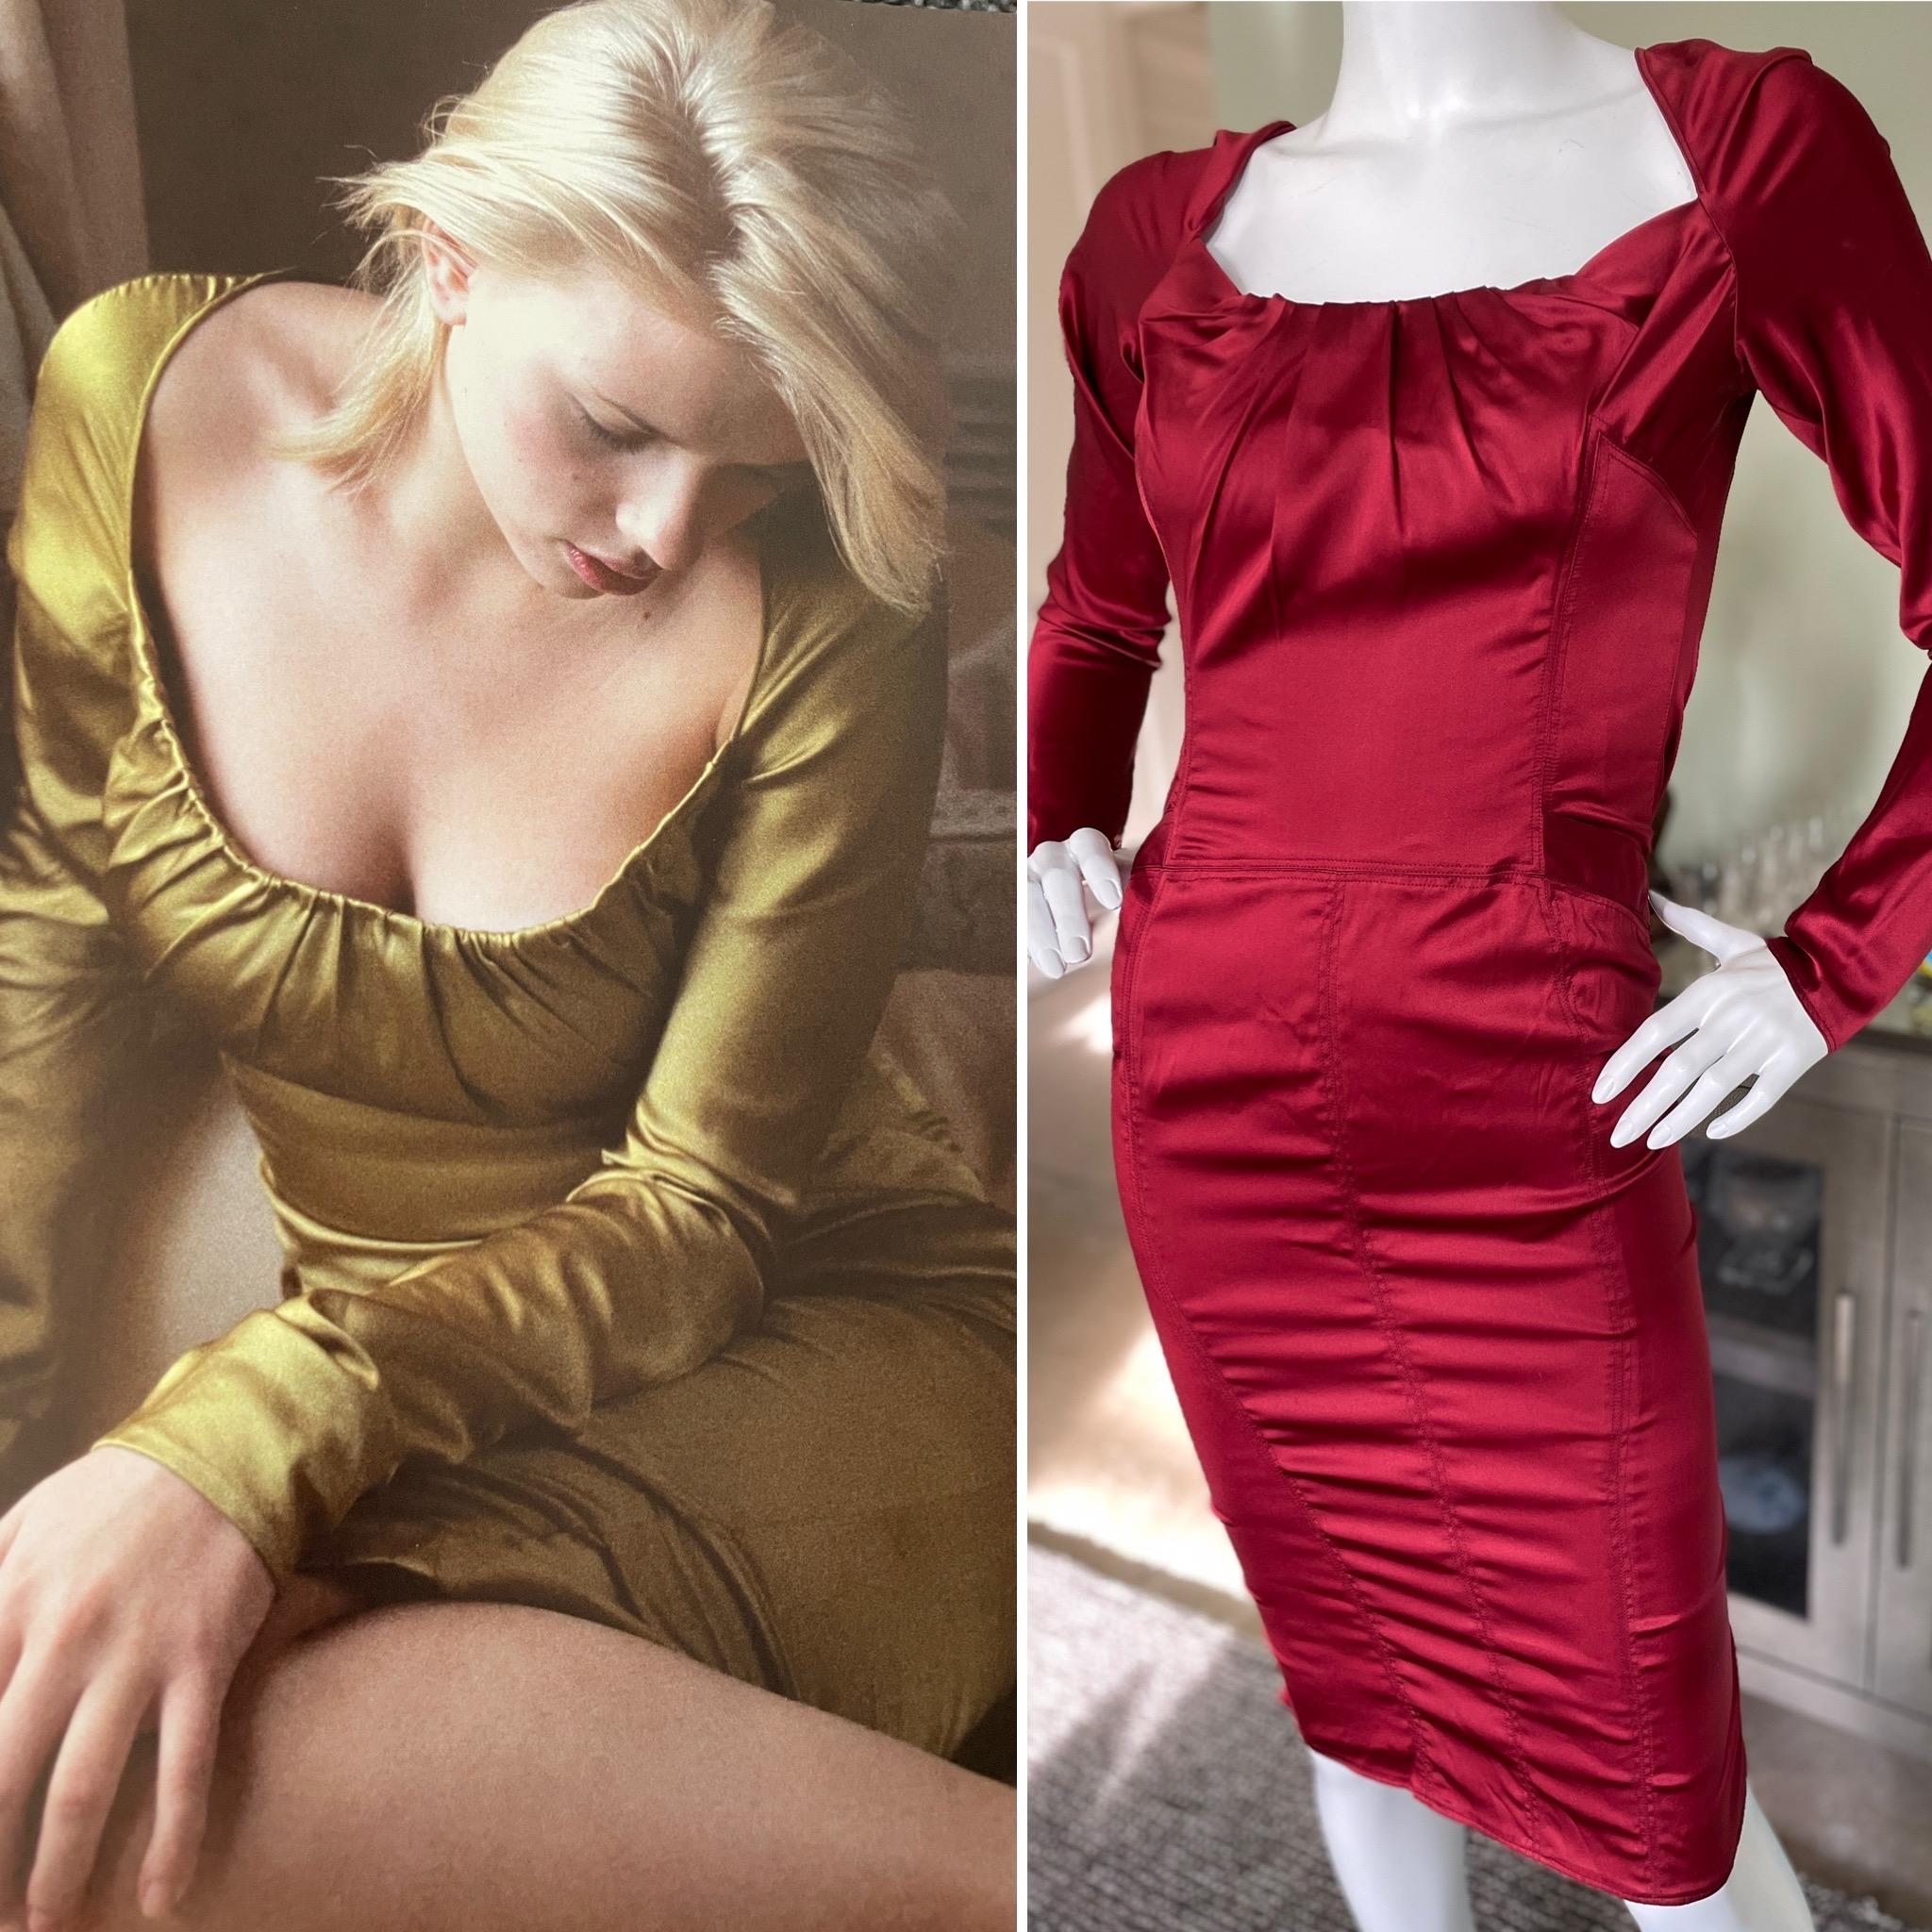 Gucci by Tom Ford Autumn 2003 Red Silk Cocktail Dress
This dress is featured in the Tom Ford book in green.
Size 38
Bust 38